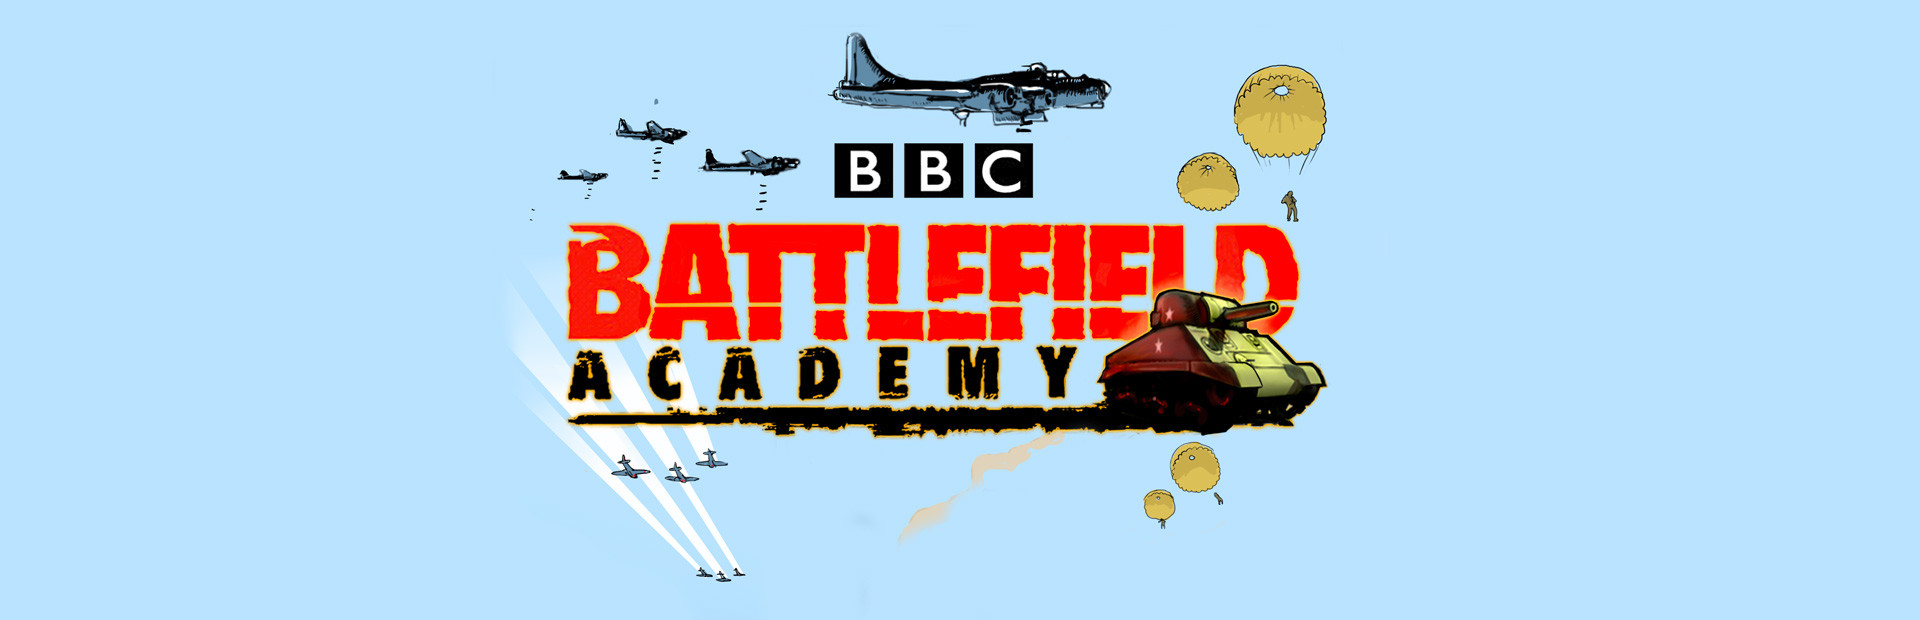 Battle Academy cover image